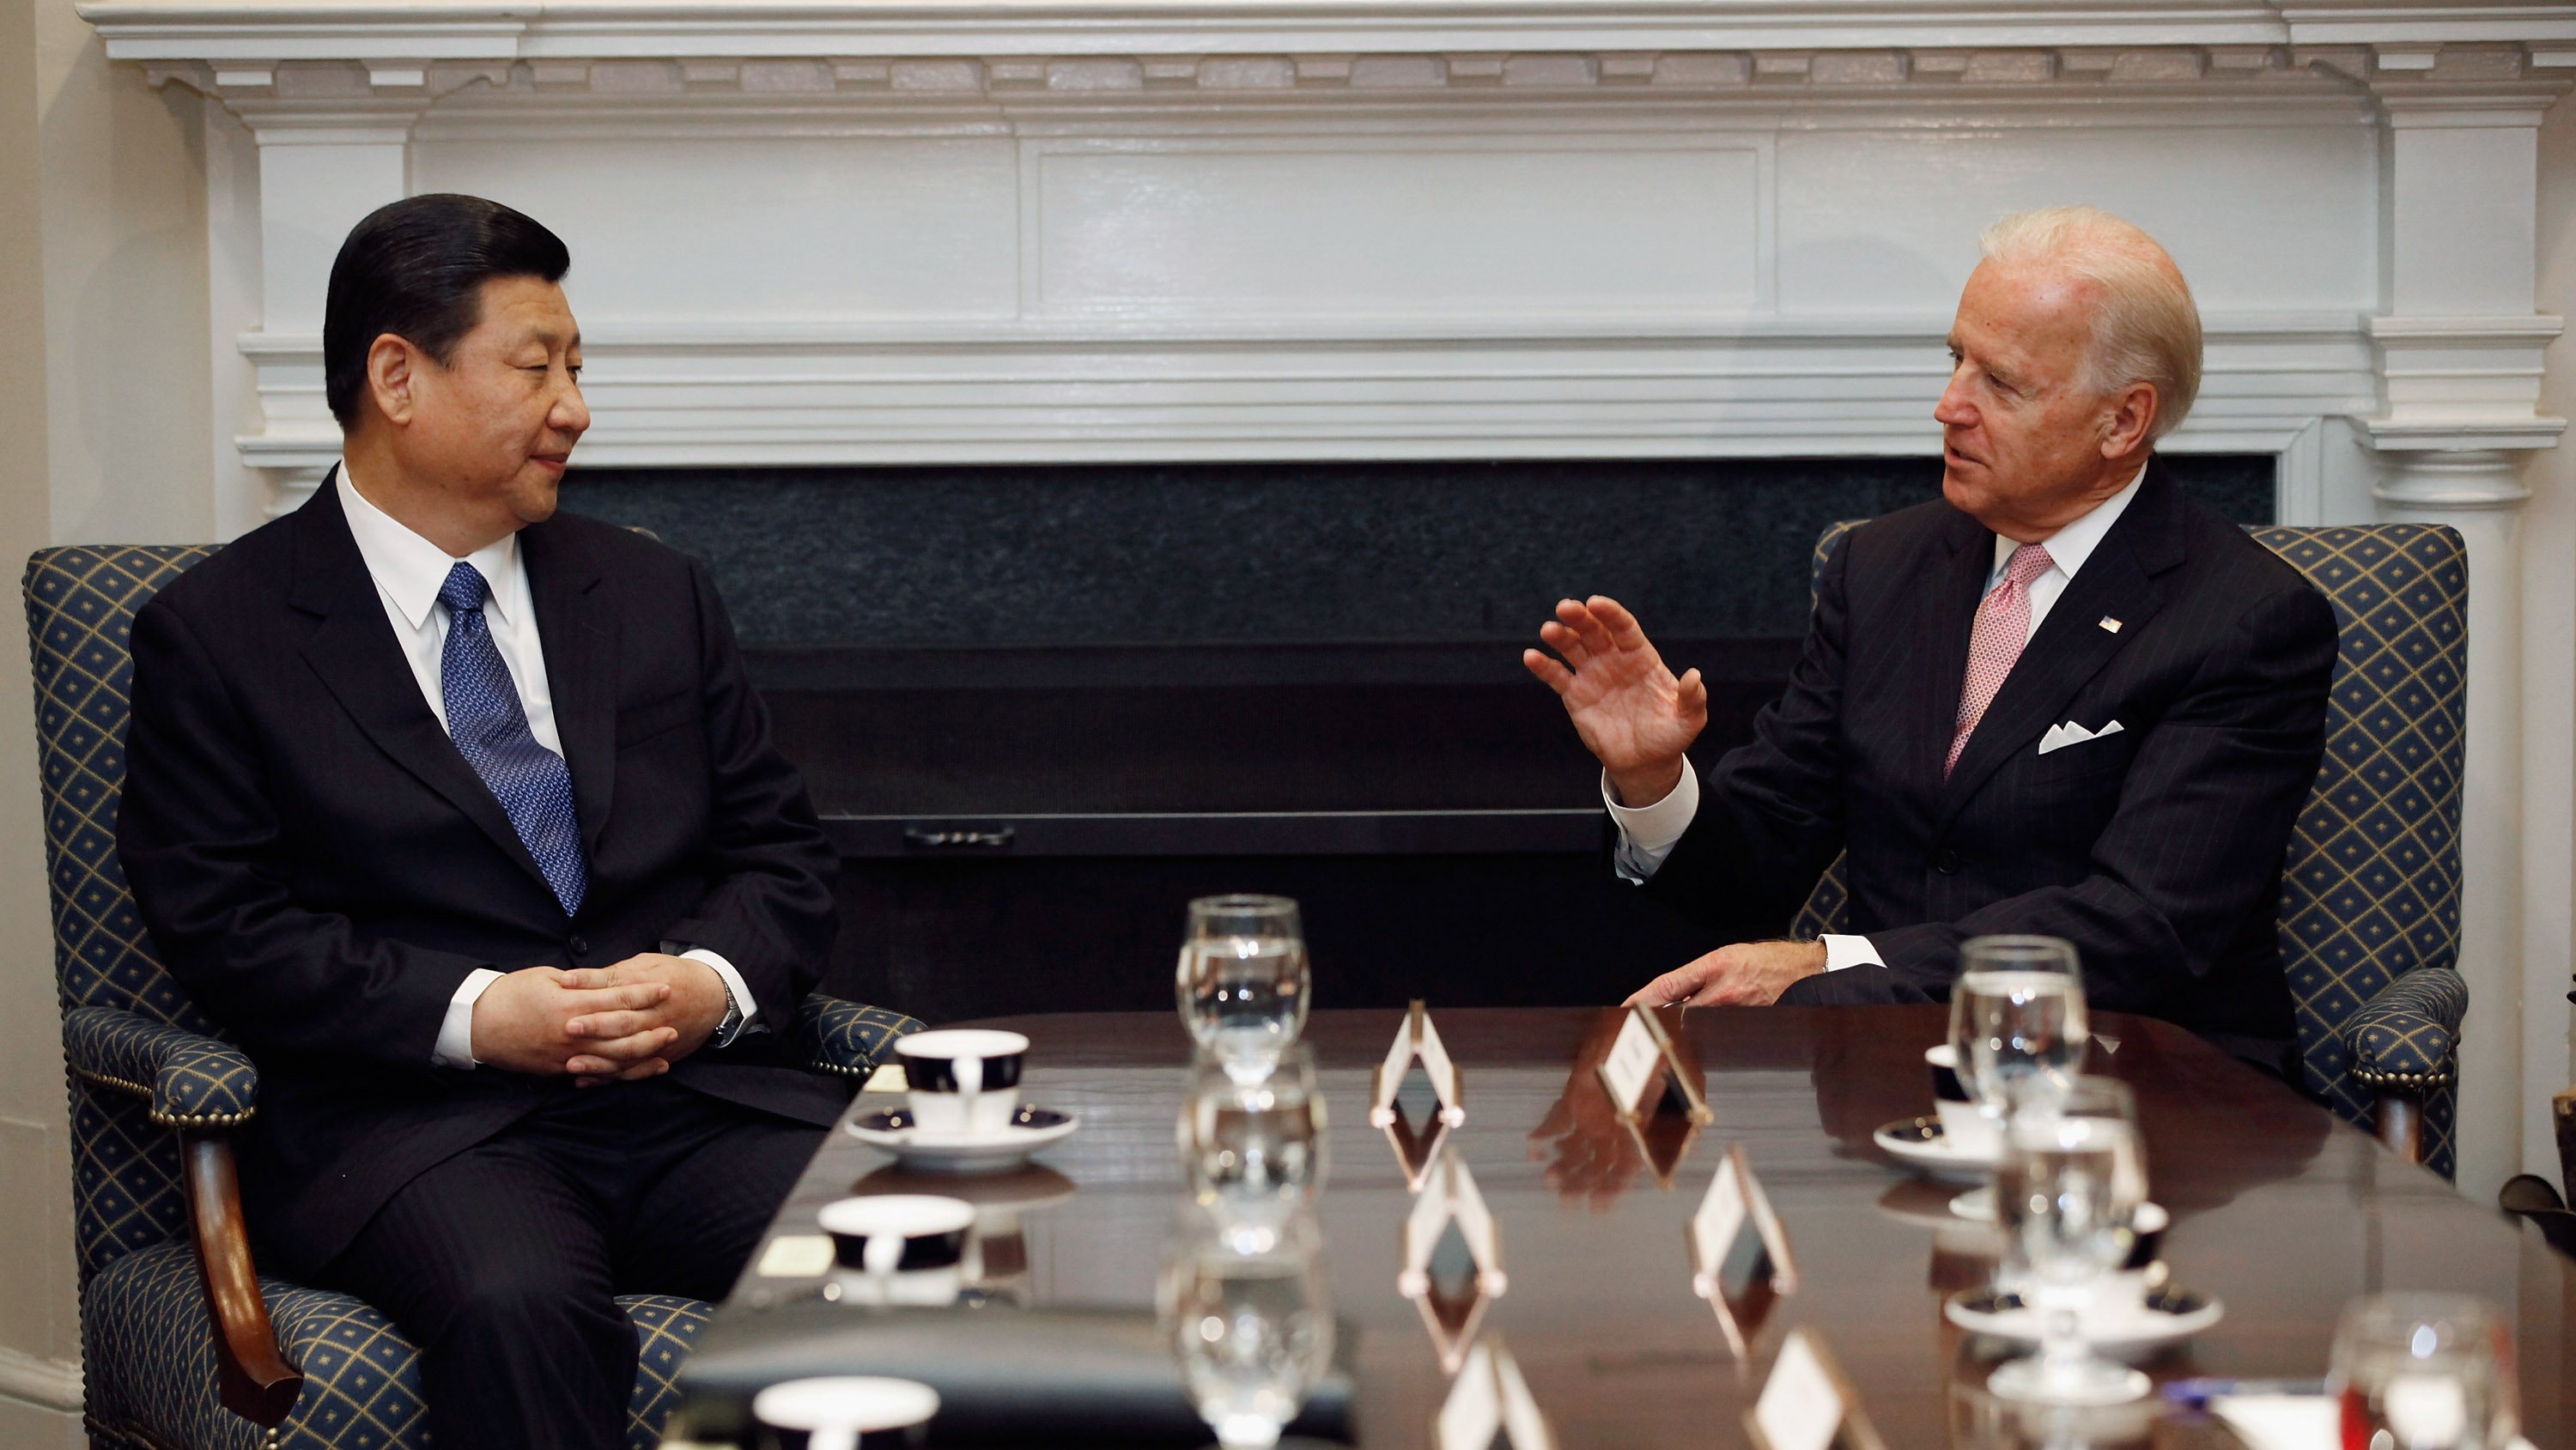 Vice President Biden Holds Bilateral Meeting With Chinese Vice President Xi Jinping